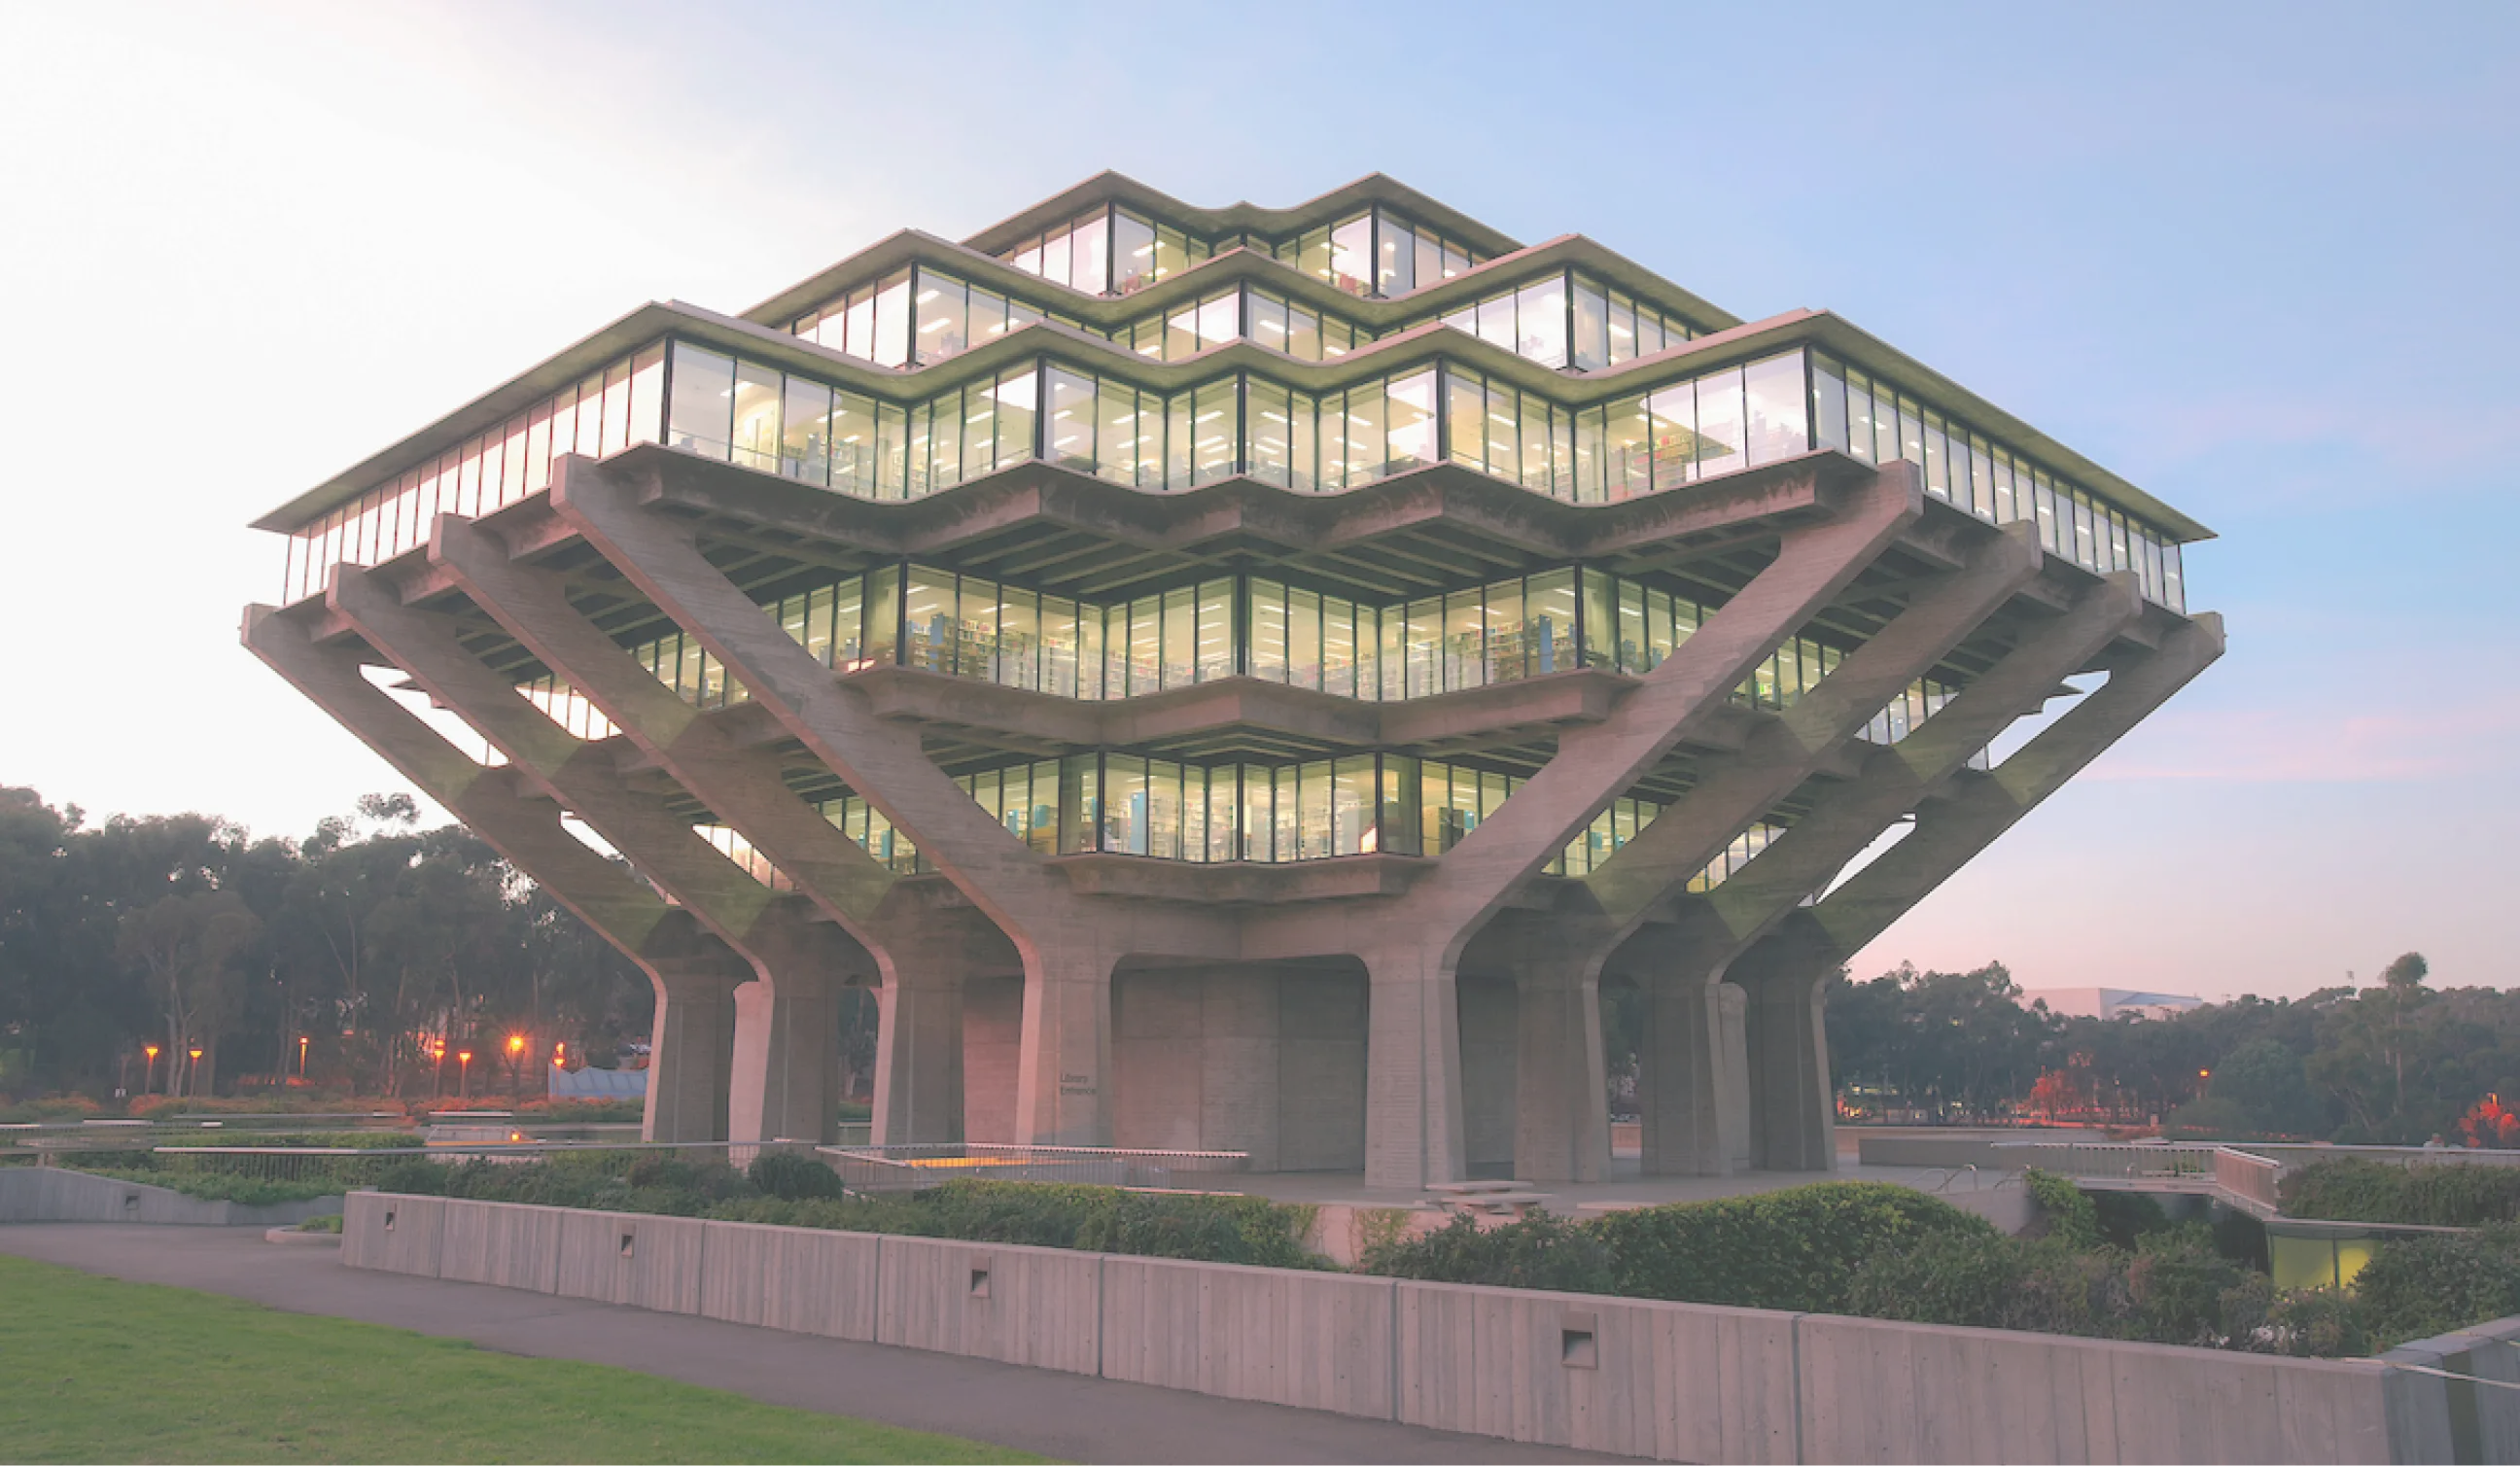 Geisel Library at UCSD